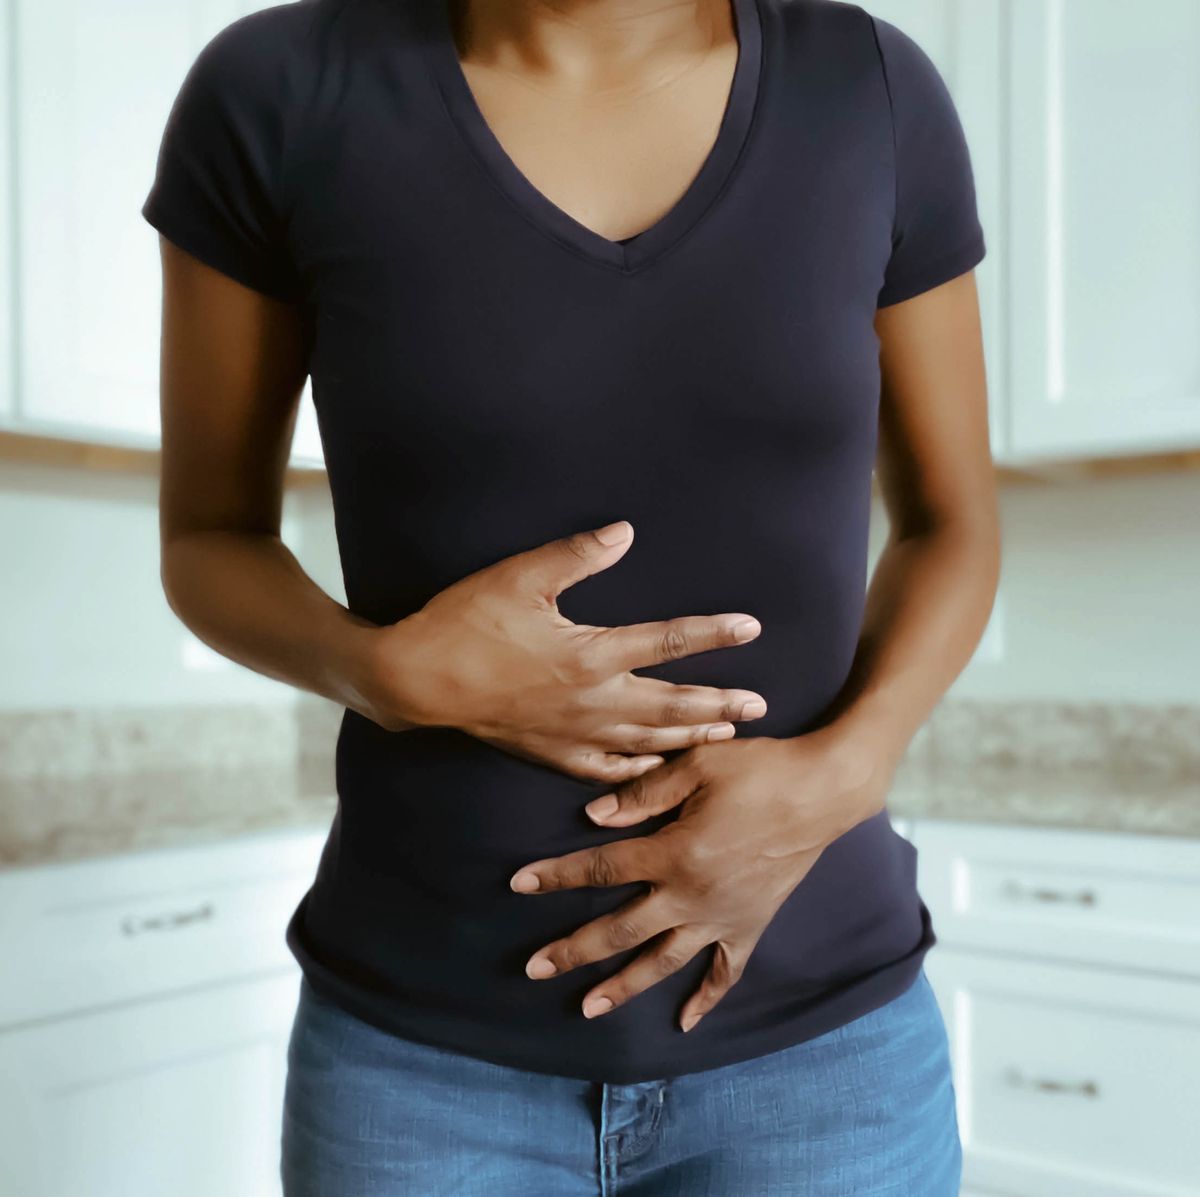 What Causes Lower Abdominal Pain in Females